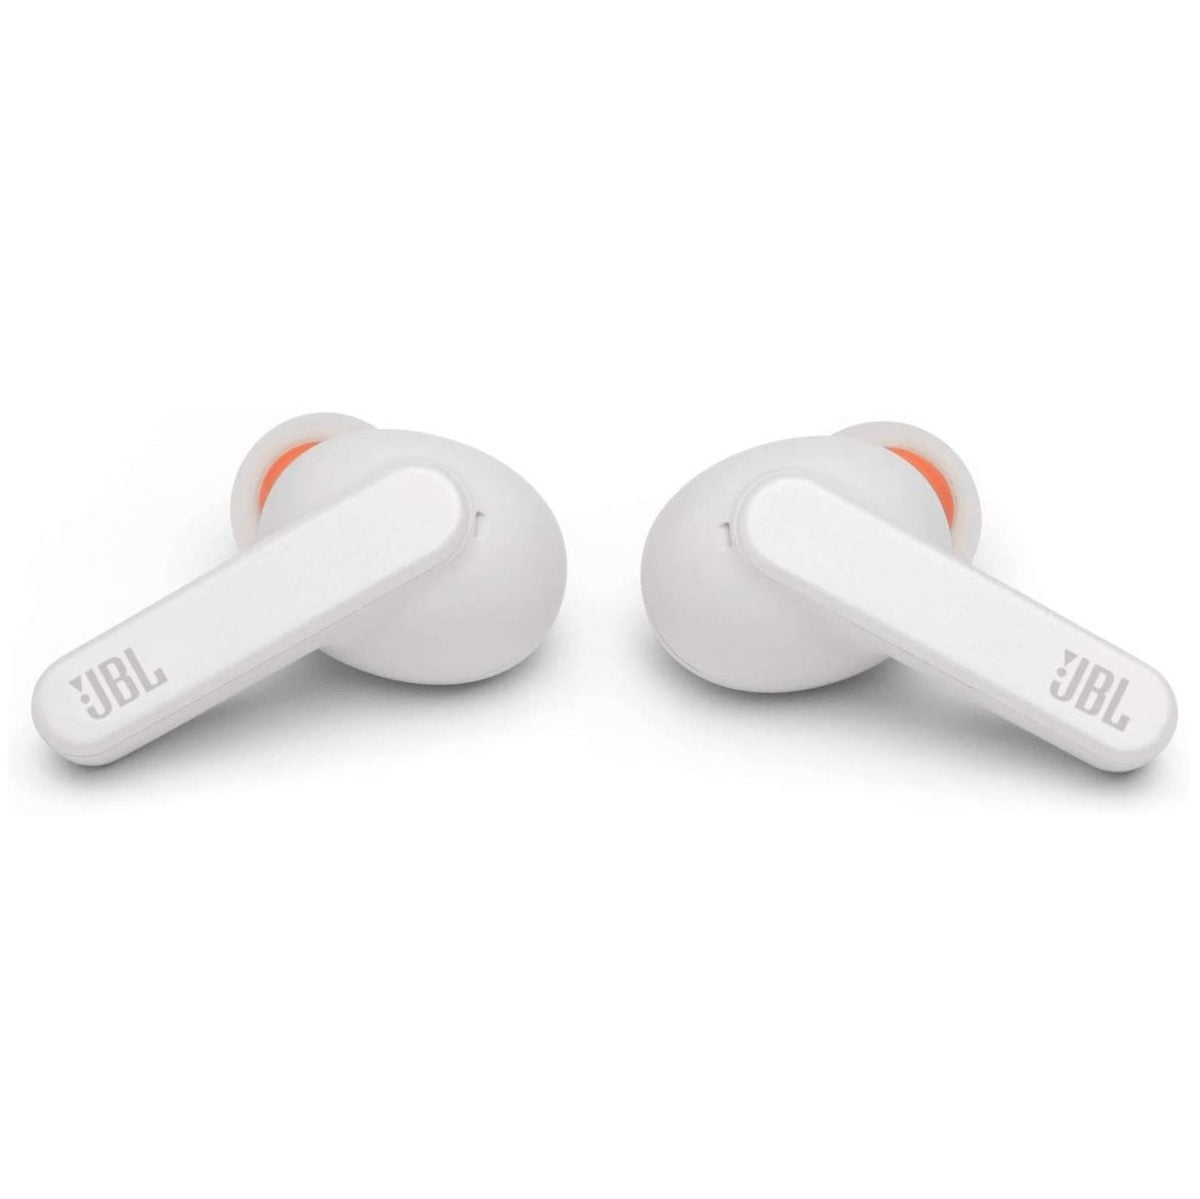 Jbl &Lt;H1&Gt;Jbl Live Pro Plus True Wireless Noise Cancelling Earbuds-White&Lt;/H1&Gt; Https://Www.youtube.com/Watch?V=Oan6Moxjv58 The Best Audio Solution Not Matter The Device, Jbl Live Pro+ Tws Delivers An Immersive True Wireless Experience With Incredible Jbl Signature Sound. Let Smart Ambient Connect You To Your Environment, Or Focus On The Music With Adaptive Noise Cancelling. Then Switch Easily From Tunes To Group Calls With 4 Mics (2 Beamforming Mics Per Side) To Capture Your Voice With The Feeling Of Face-To-Face Conversation And A Third Mic For Environmental Noise Reduction. All Commands Are On The Earbuds, So You Can Manage Music And Calls With Your Finger Only. Jbl Earbuds Jbl Live Pro Plus Noise Cancelling Earbuds-White